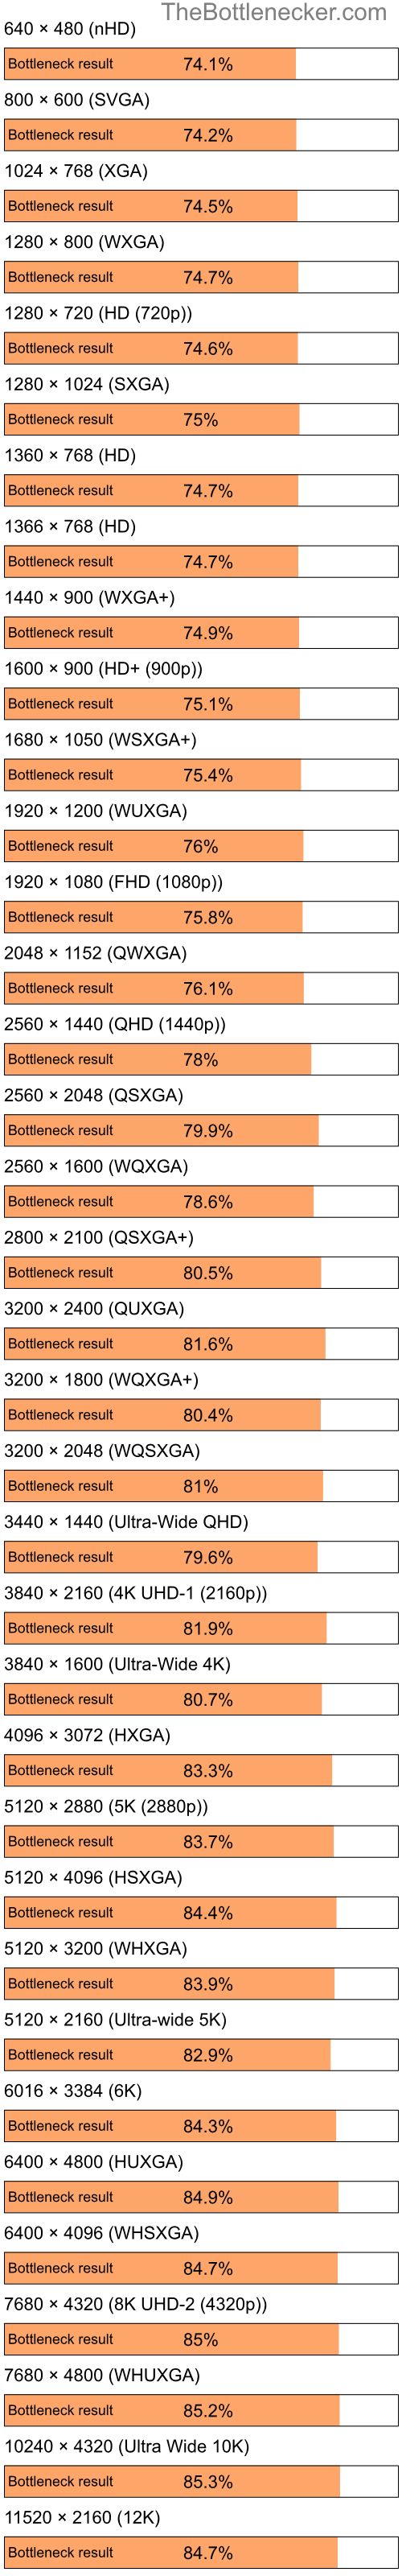 Bottleneck results by resolution for Intel Atom Z520 and NVIDIA Quadro FX 3000 in Graphic Card Intense Tasks